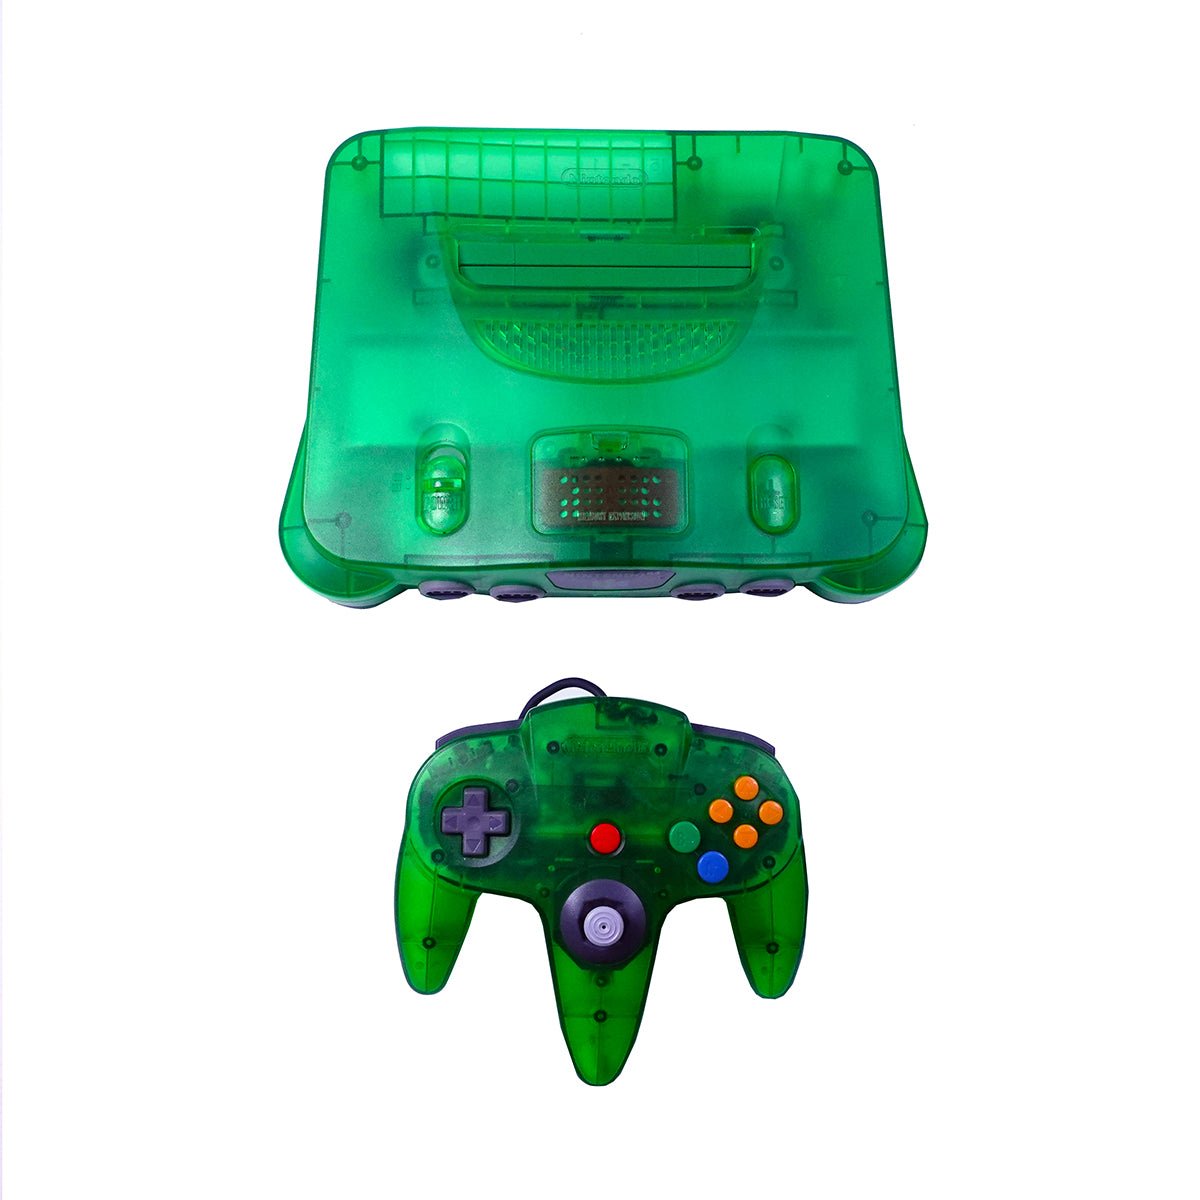 (Pre-Owned) Nintendo 64 Video Game Console - Transparent Green - ريترو - Store 974 | ستور ٩٧٤